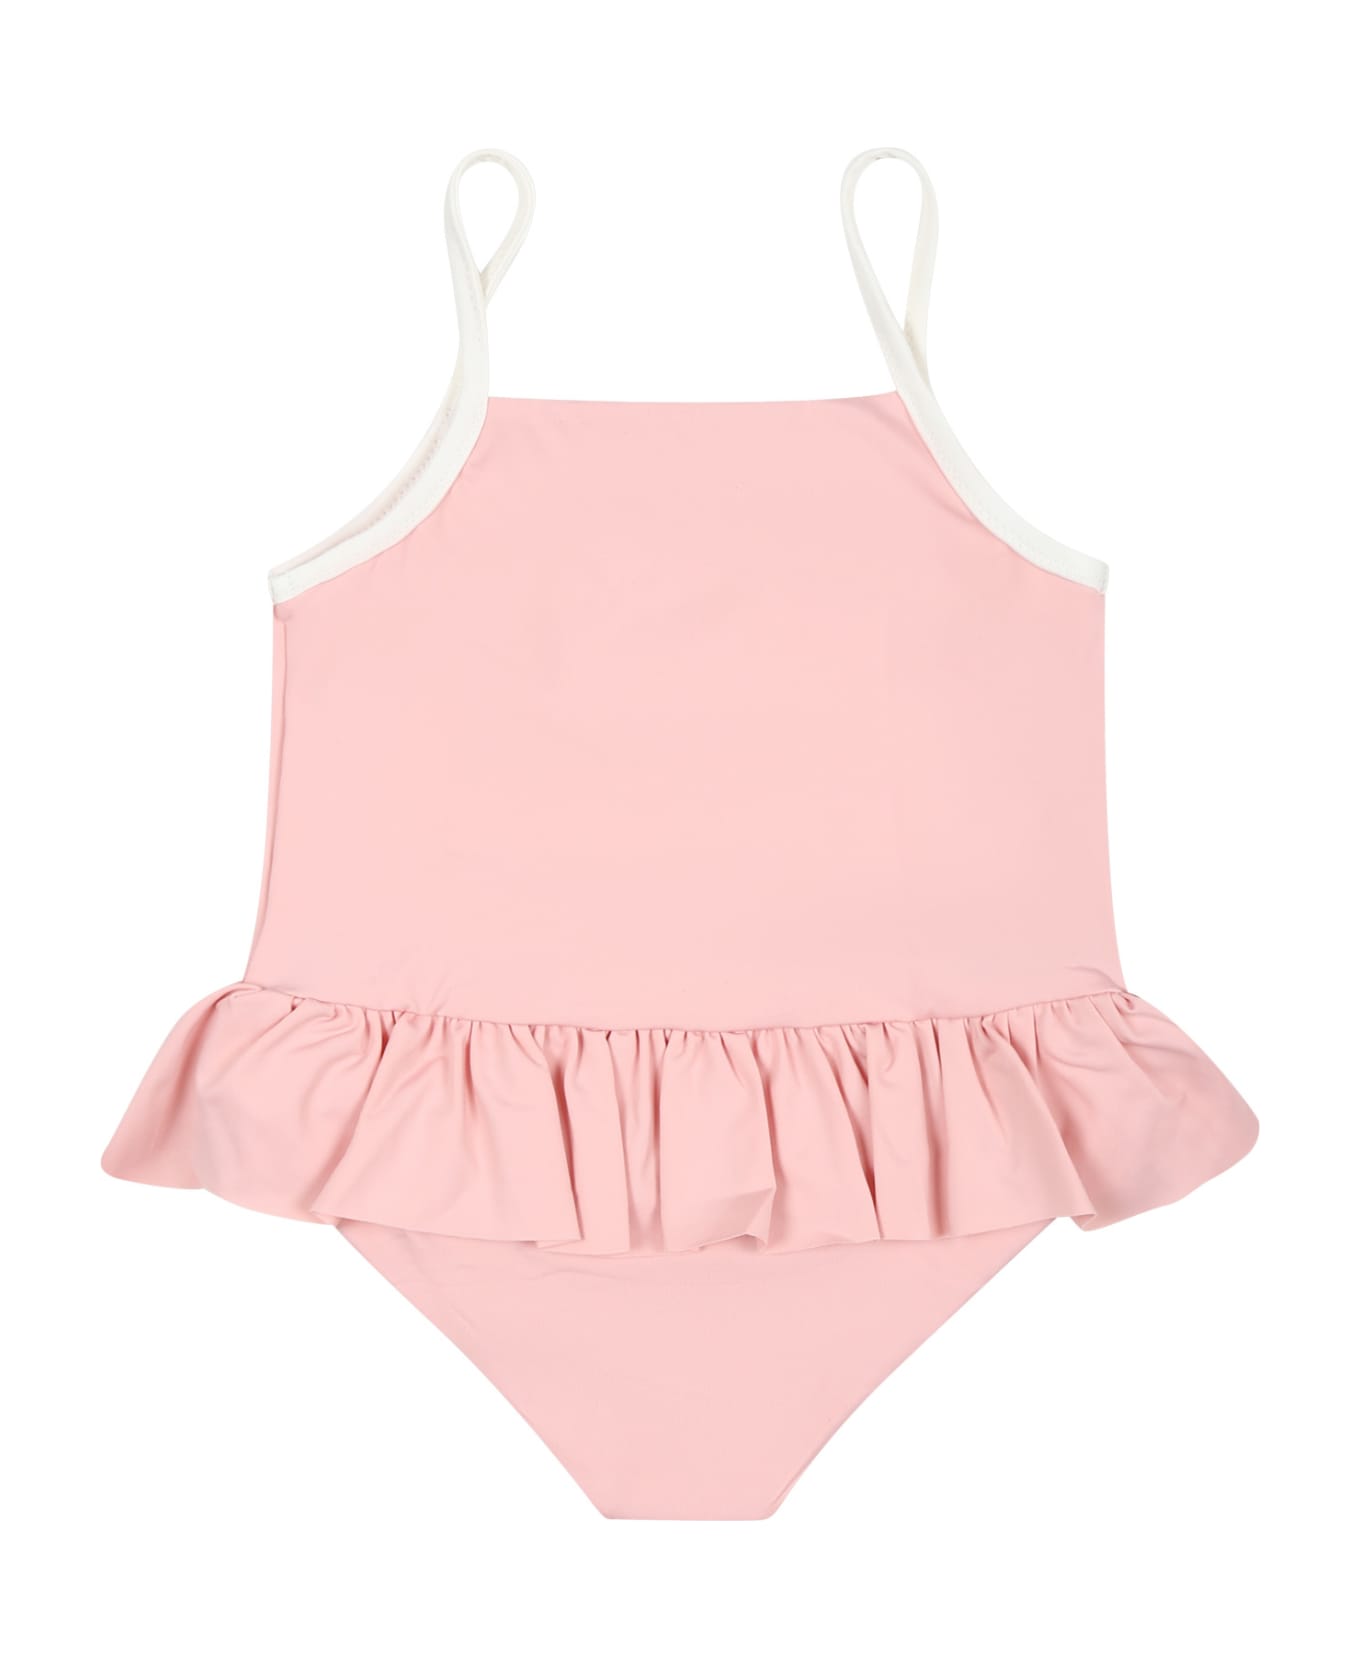 Moncler Pink One-piece Swimsuit For Baby Girl With Logo - Pink 水着